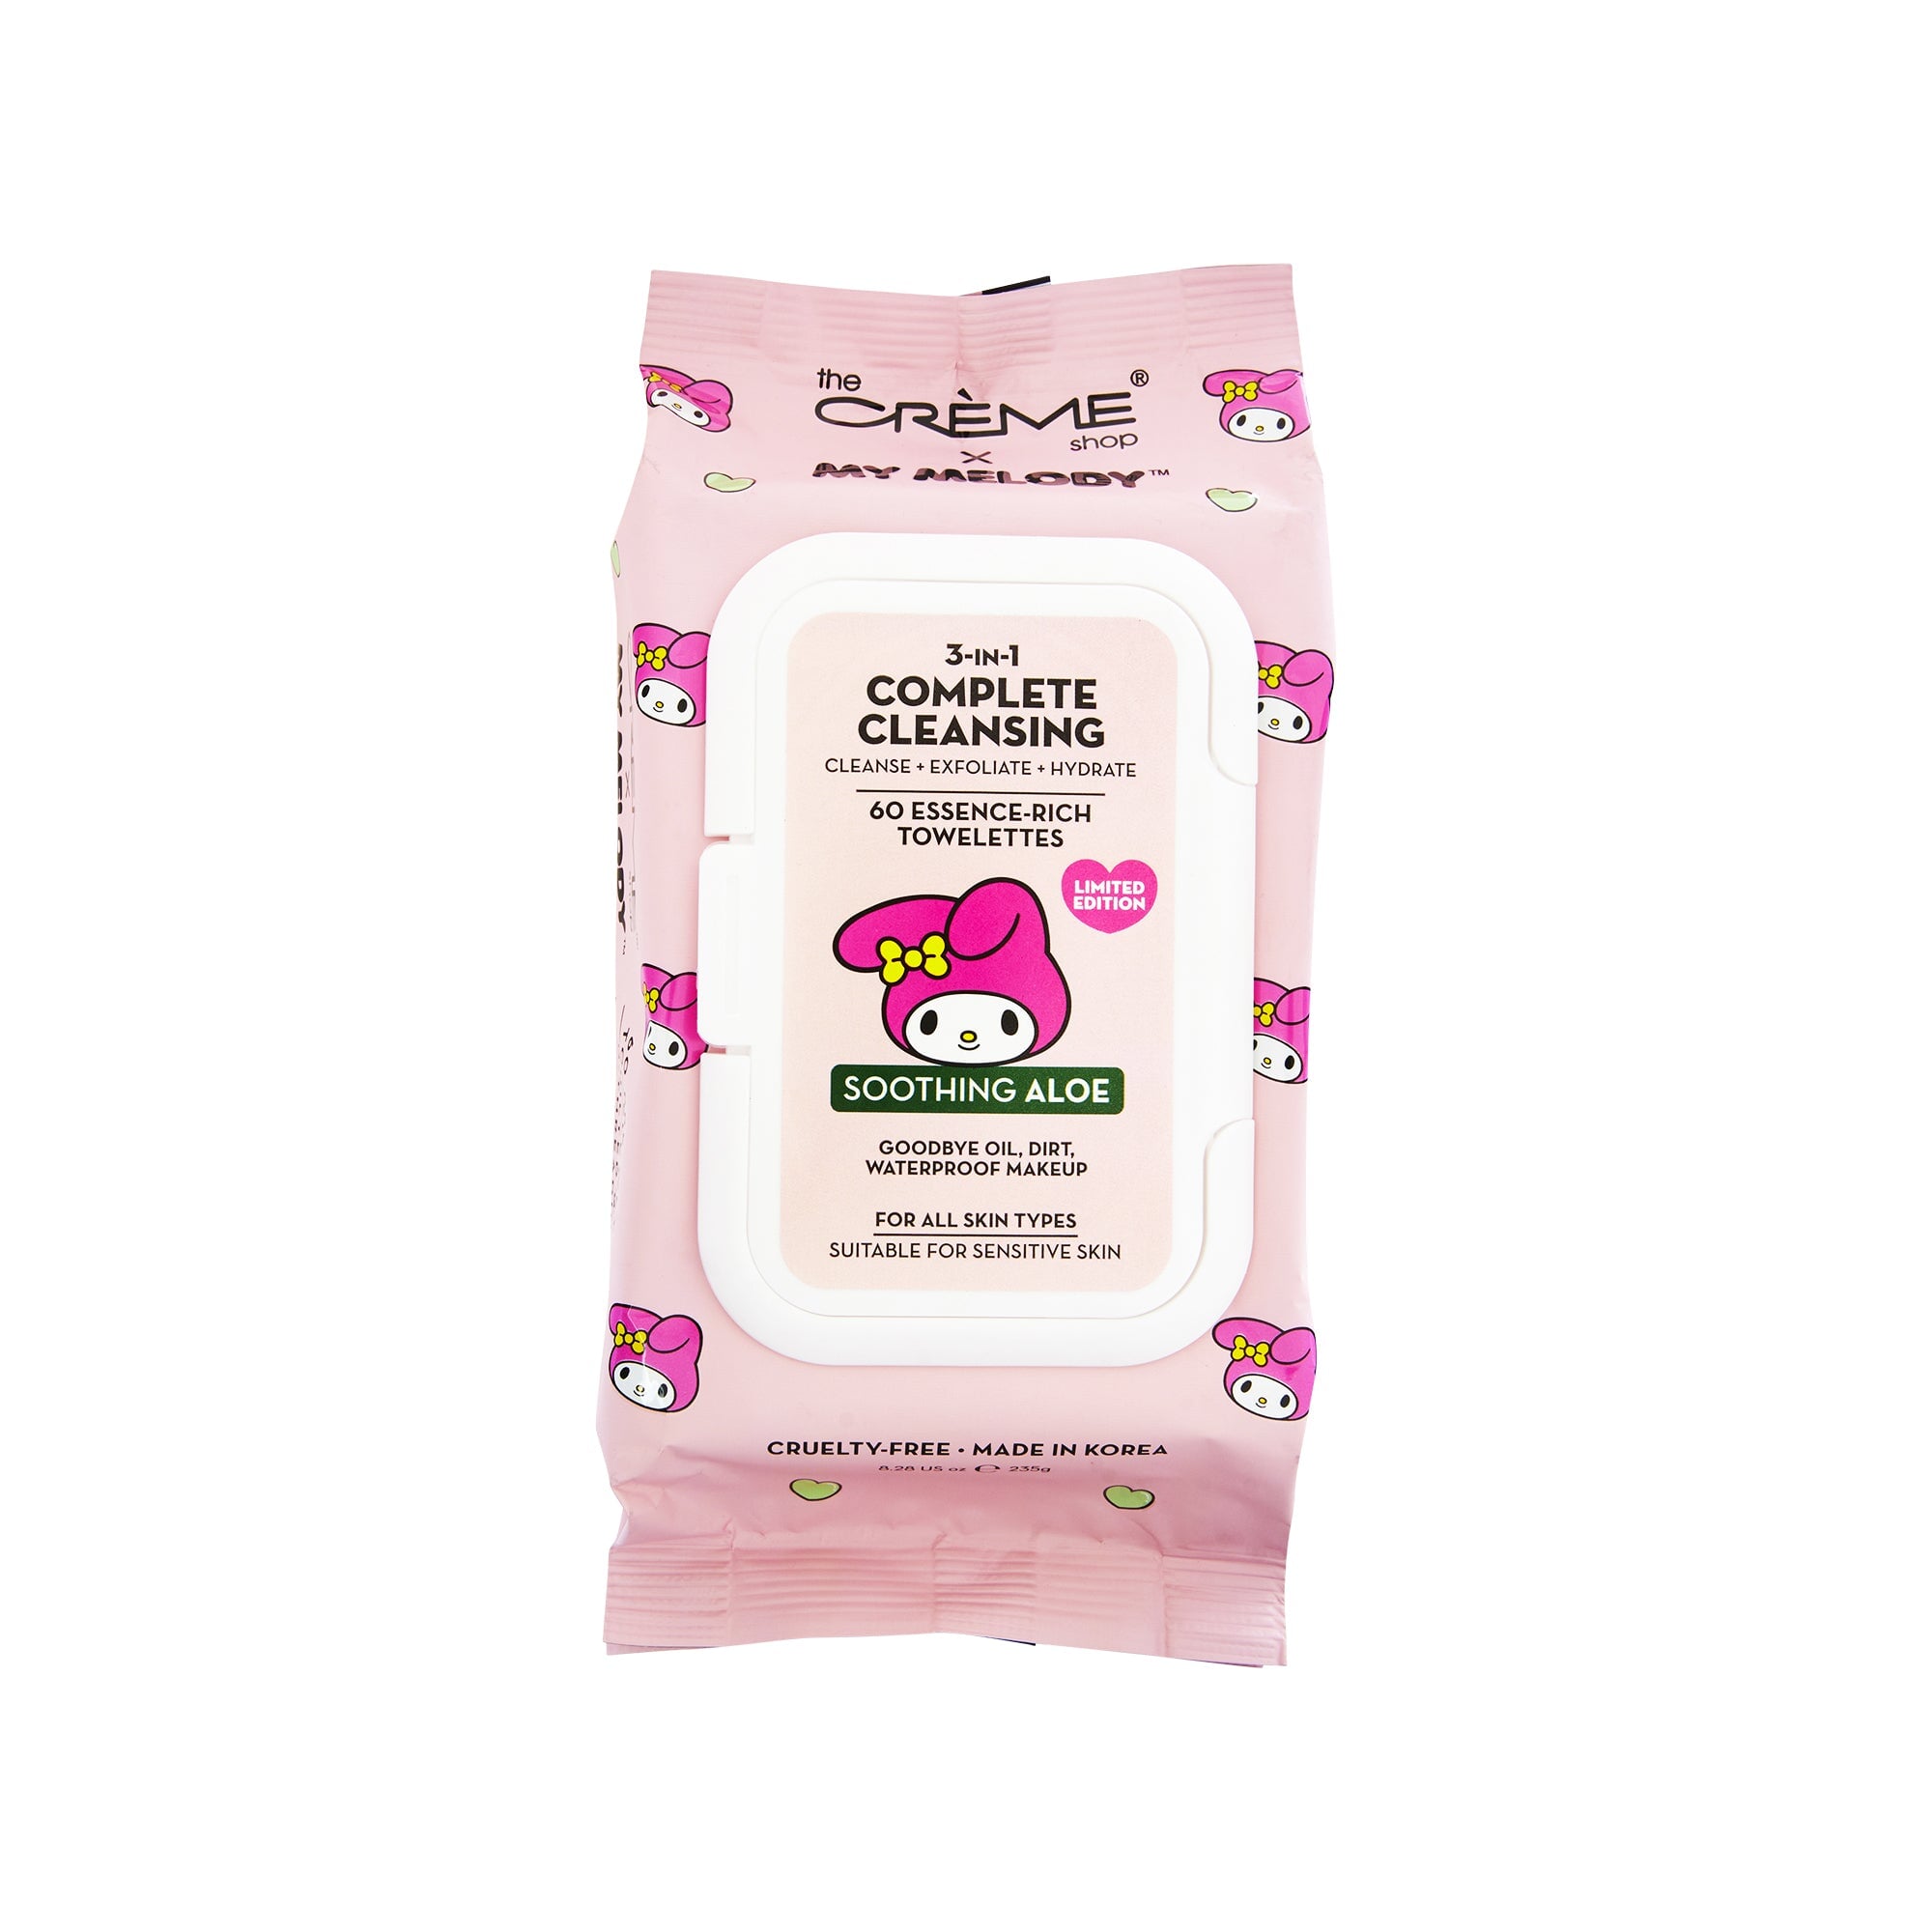 My Melody 3-IN-1 Complete Cleansing Essence-Rich Towelettes - Smoothing Aloe Towelettes The Crème Shop x Sanrio 